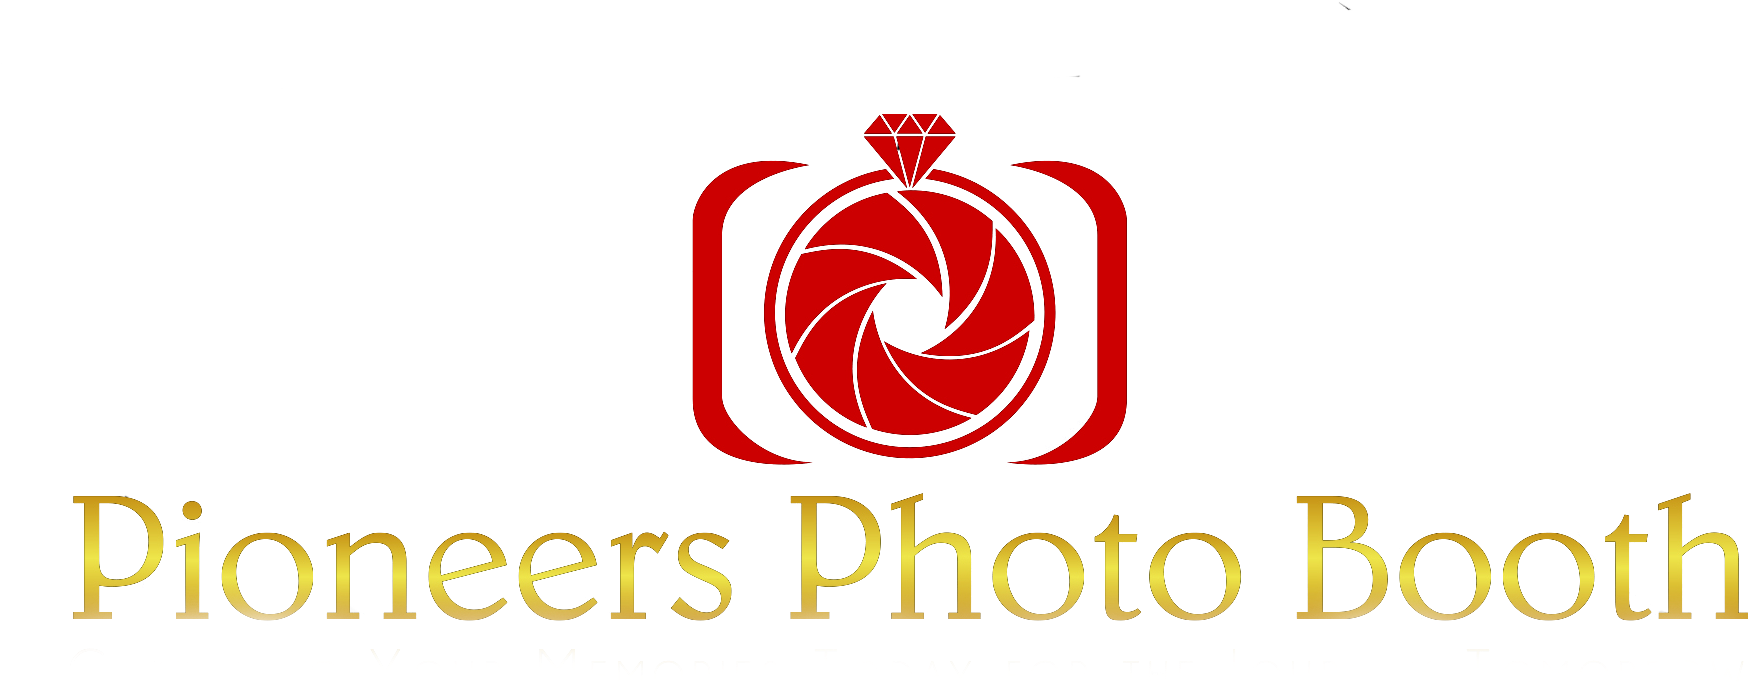 Pioneers Photo Booth Logo PNG